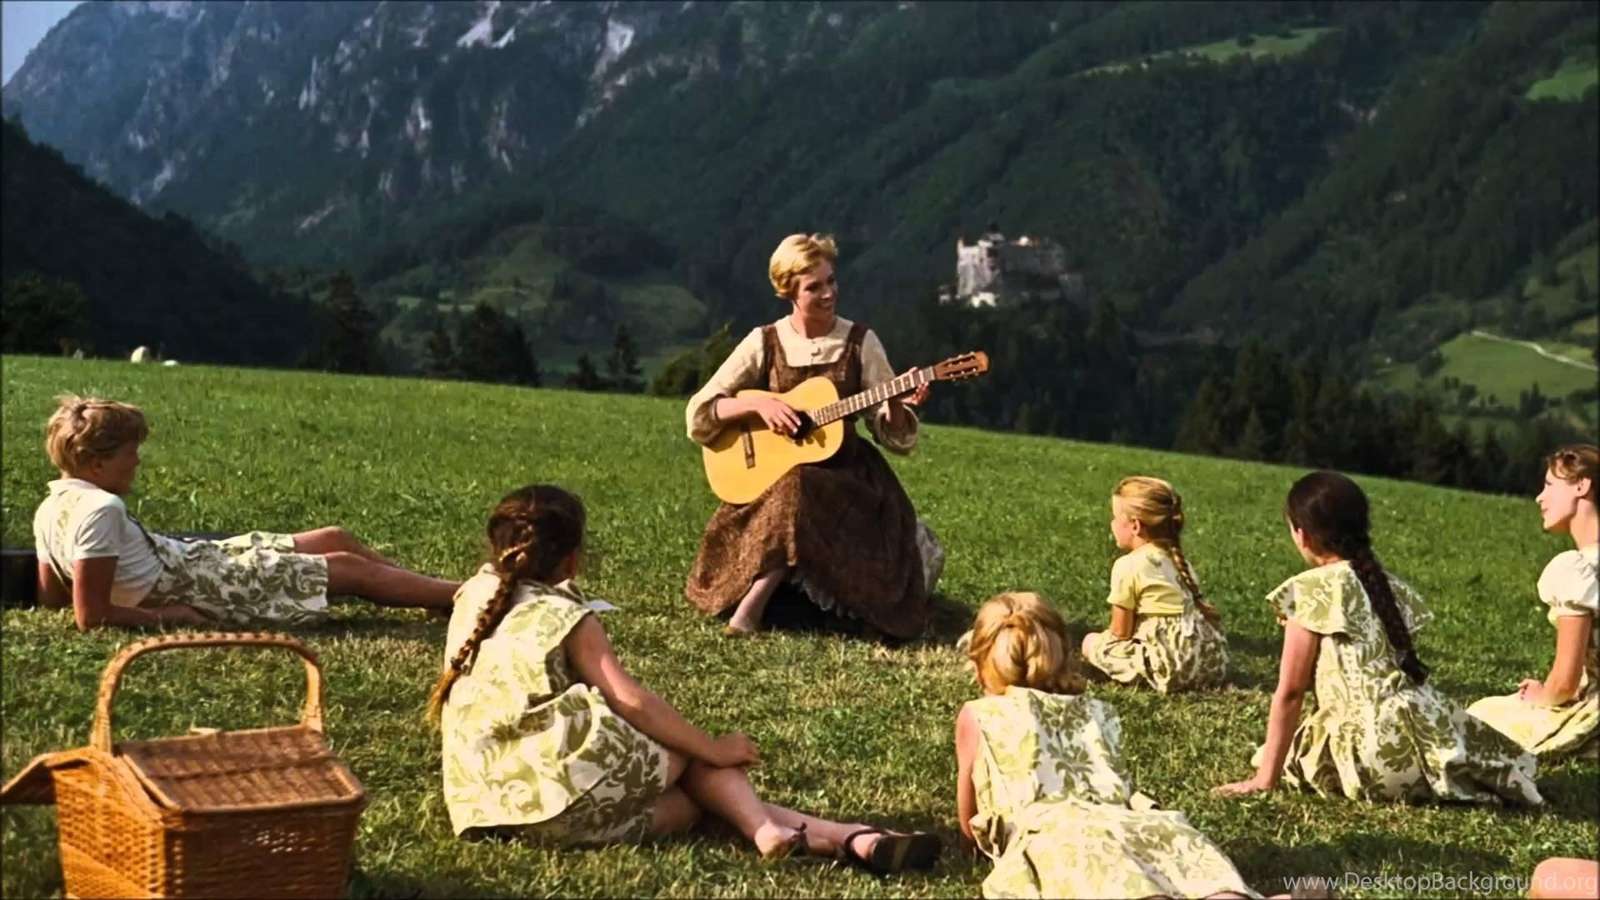 SOUND OF MUSIC online puzzle